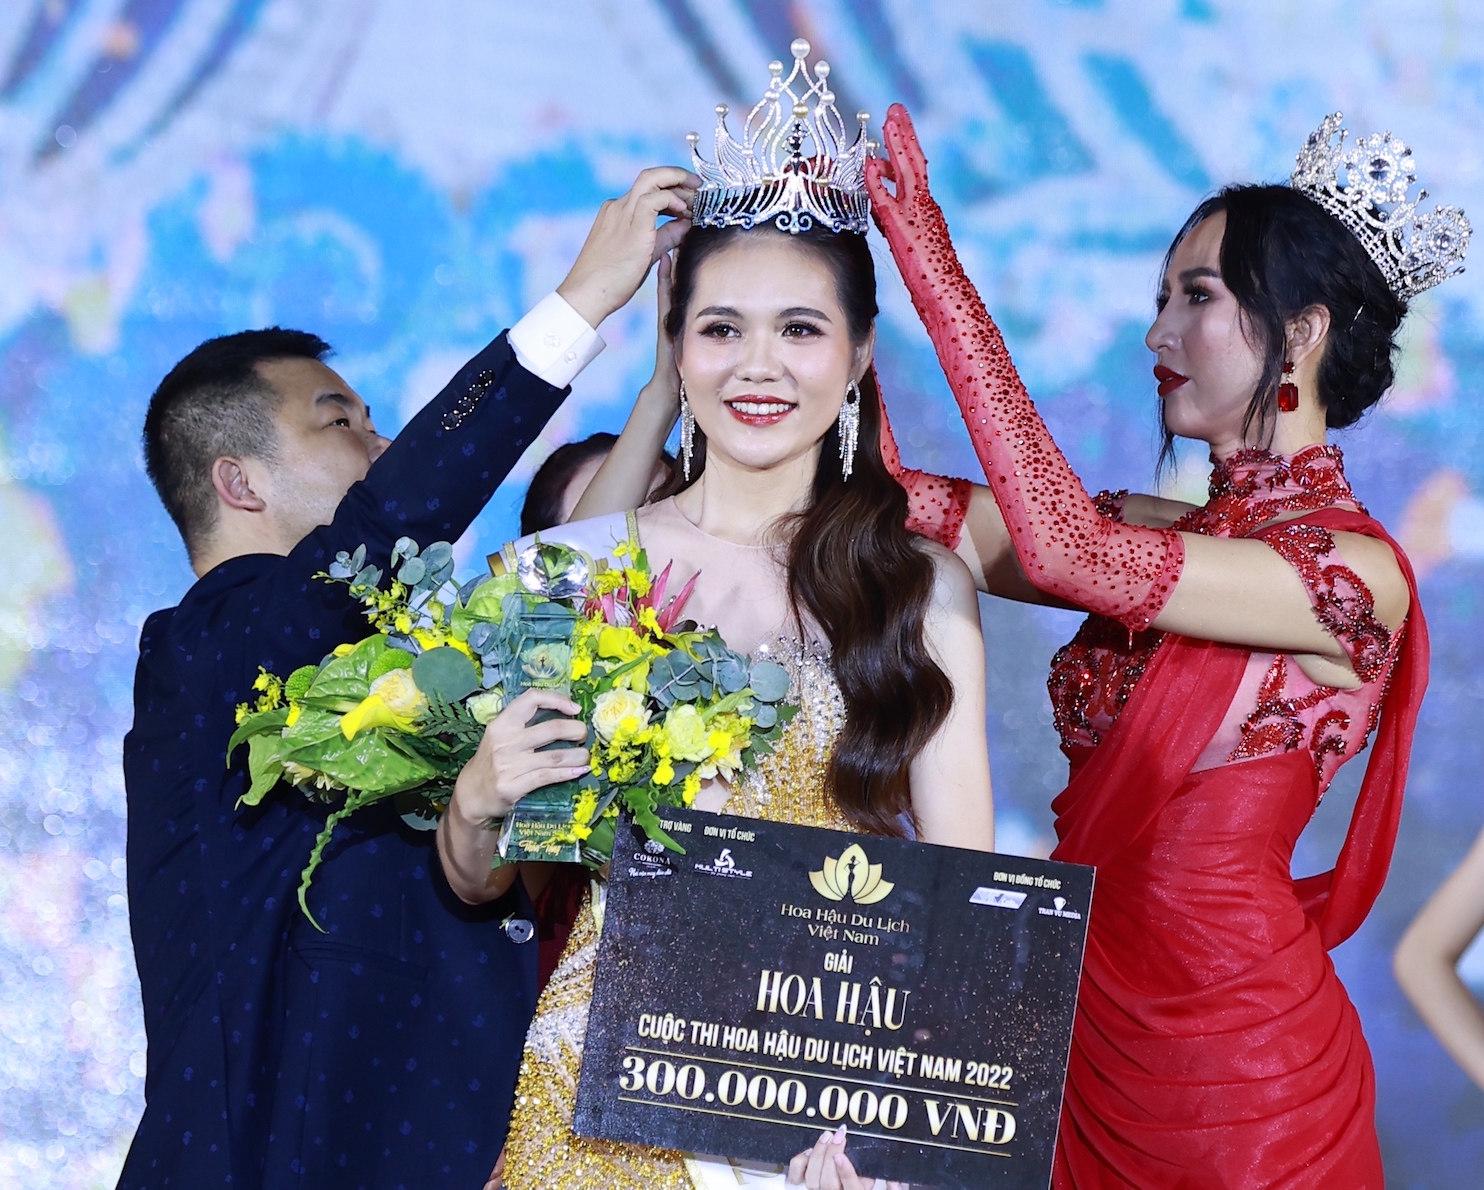 22-year-old crowned Miss Tourism Vietnam 2022